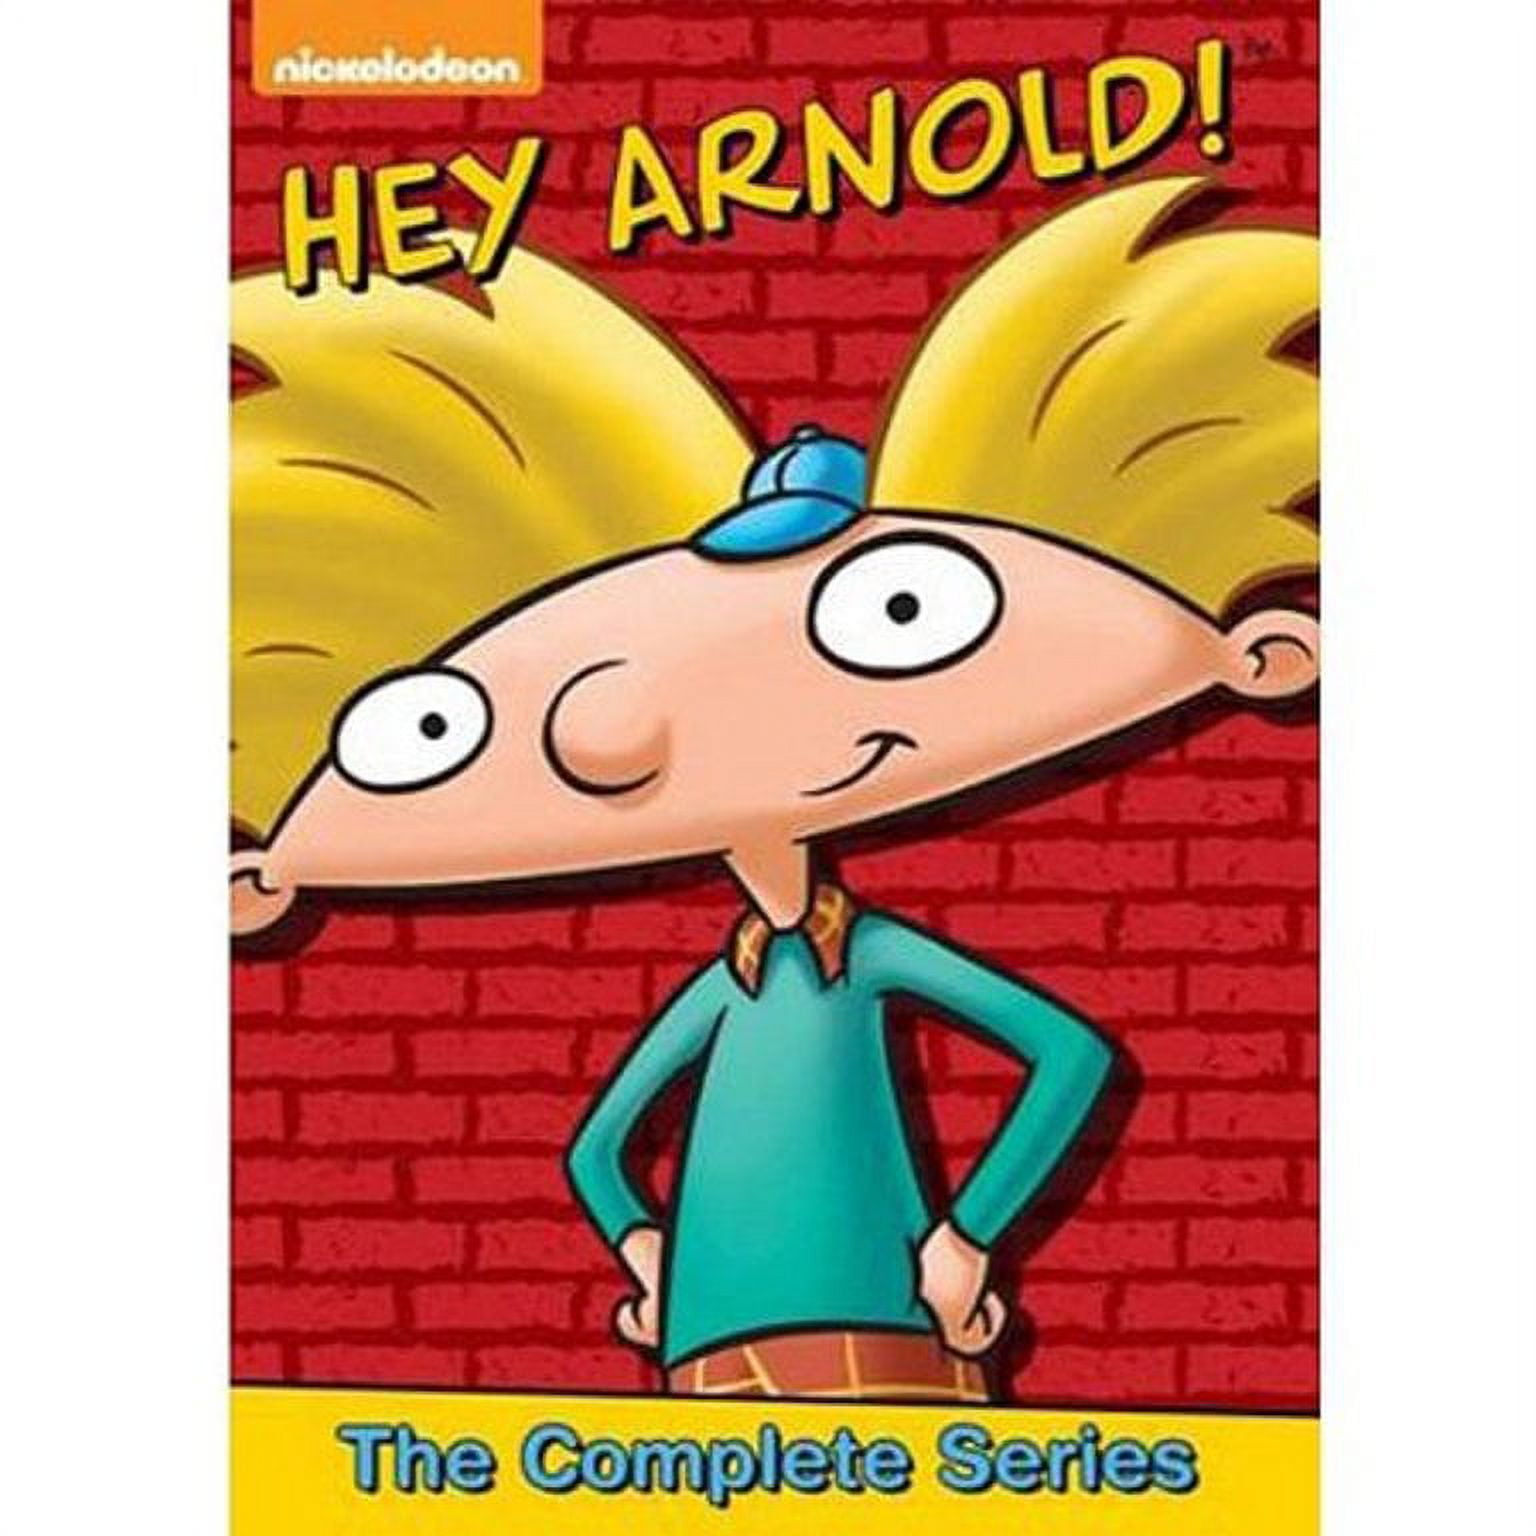 Rugrats & Hey Arnold Double Feature (DVD) - Walmart.com